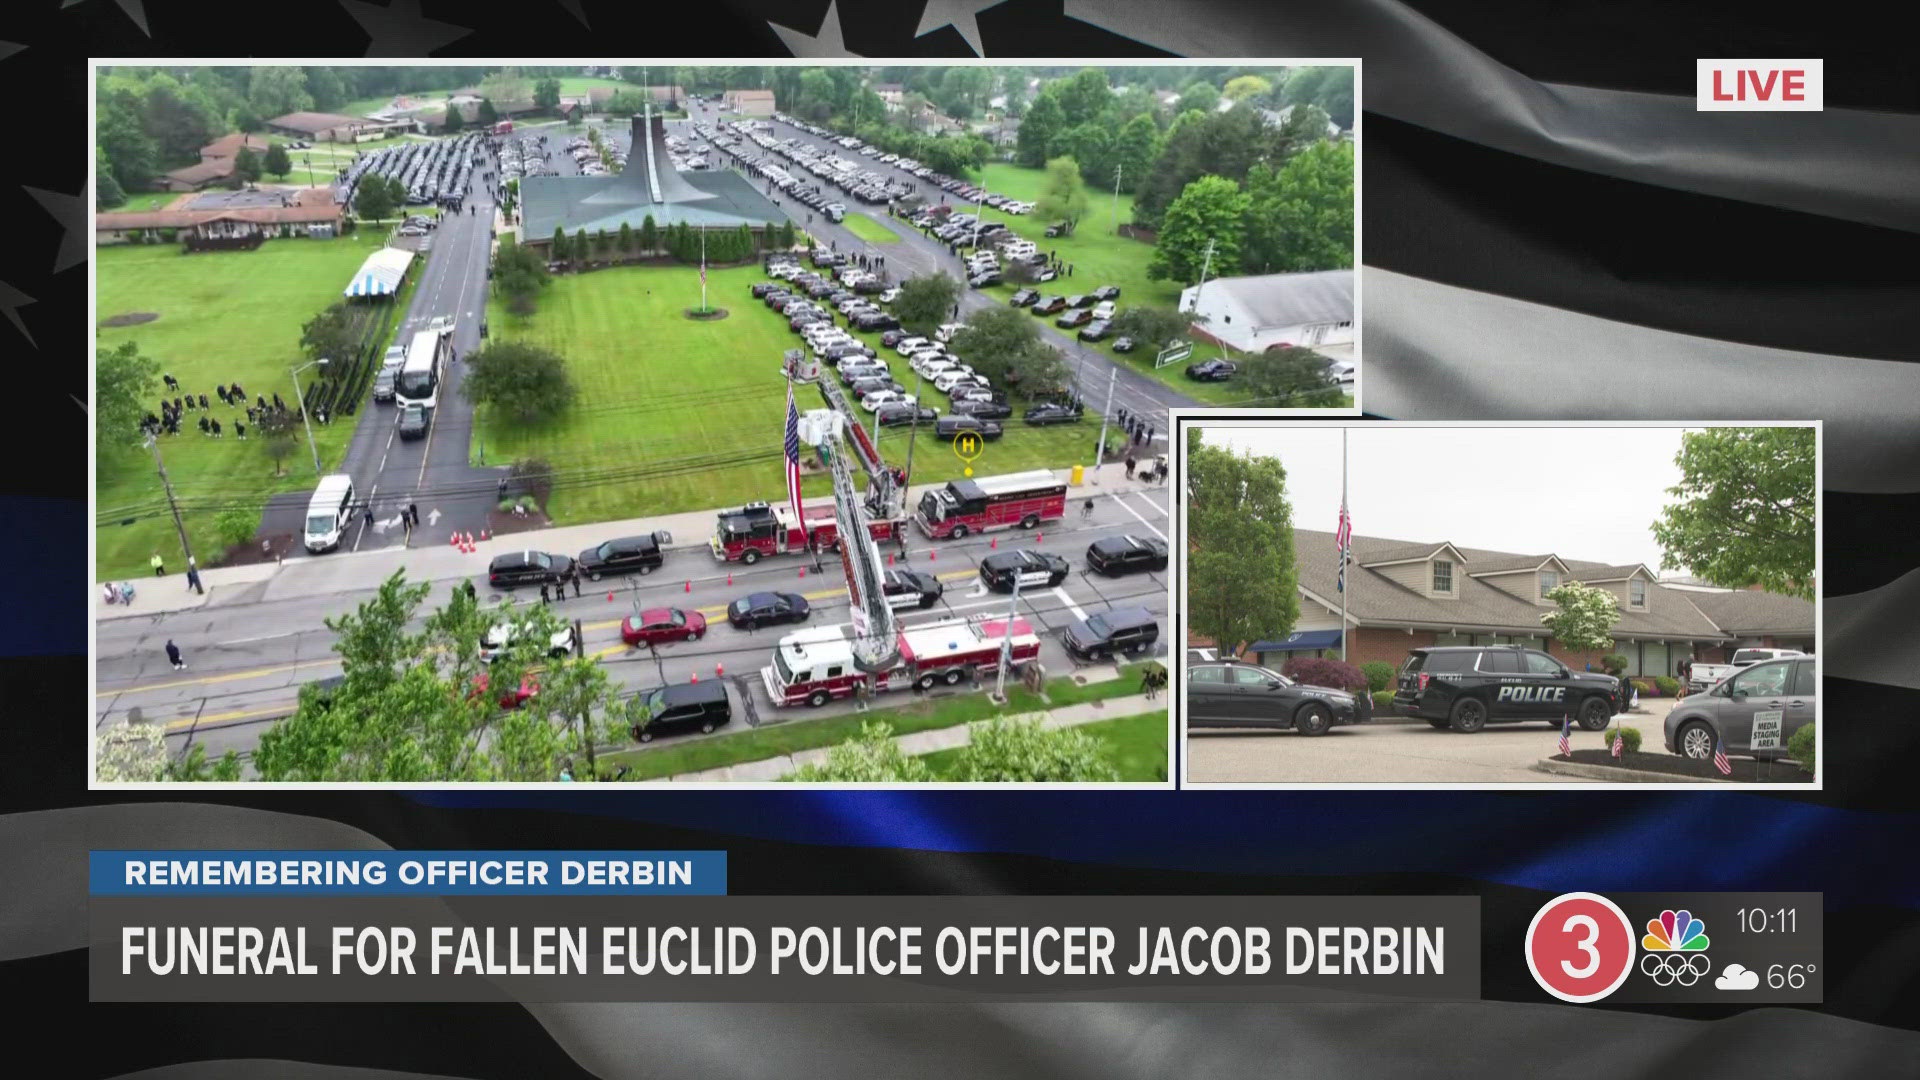 The funeral procession for Euclid police officer Jacob Derbin is lining up. 3News provides team coverage.